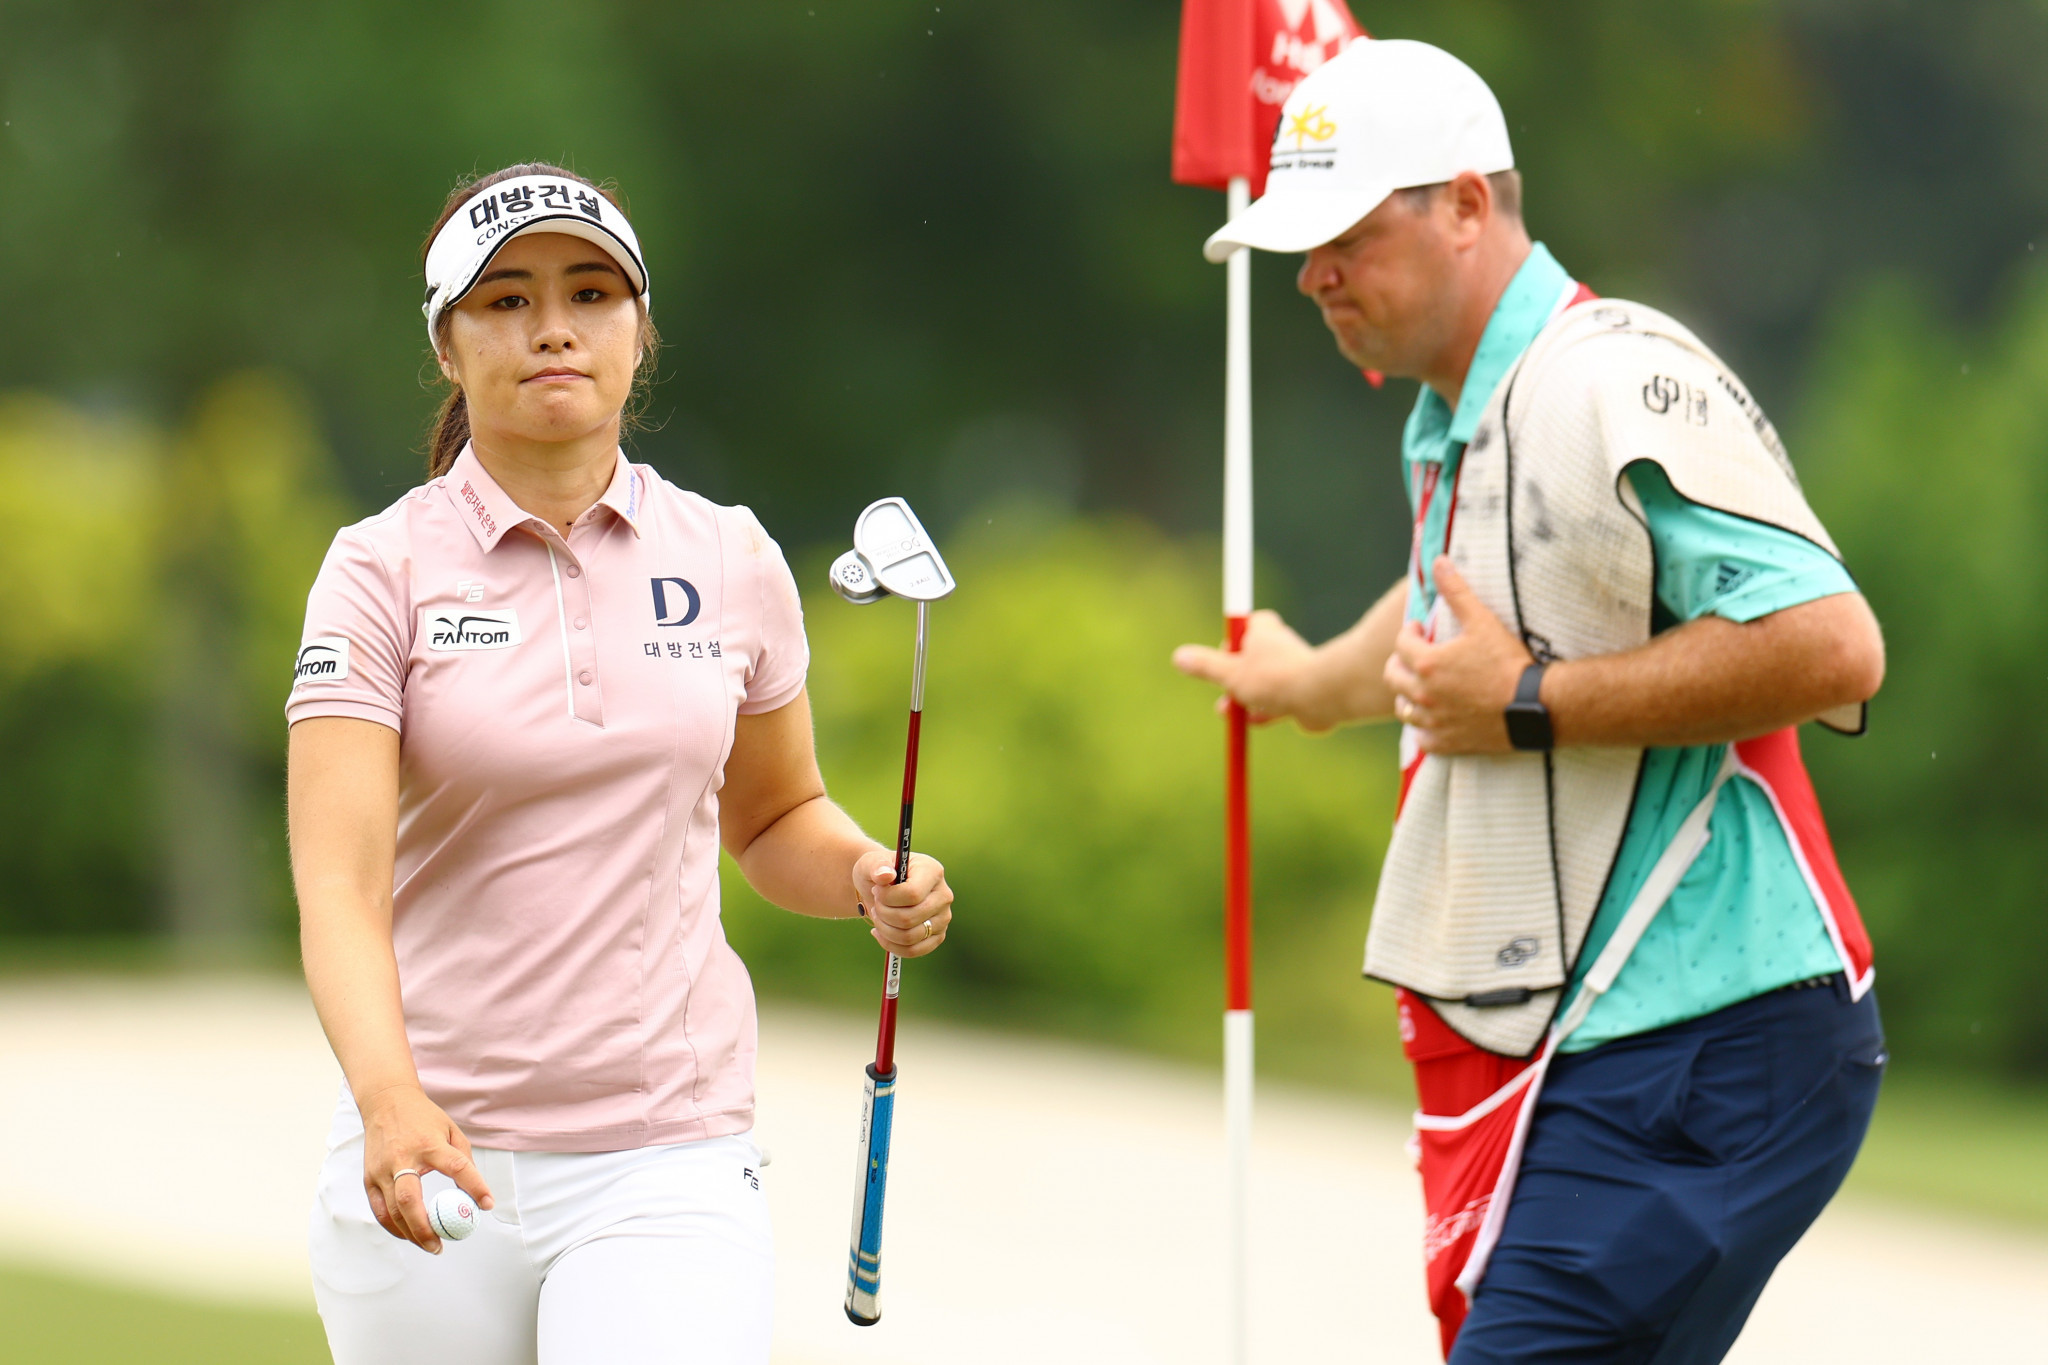 Lee Jeong-eun led the way before crumbling on the final green as Ko Jin-young swooped to take the title ©Getty Images